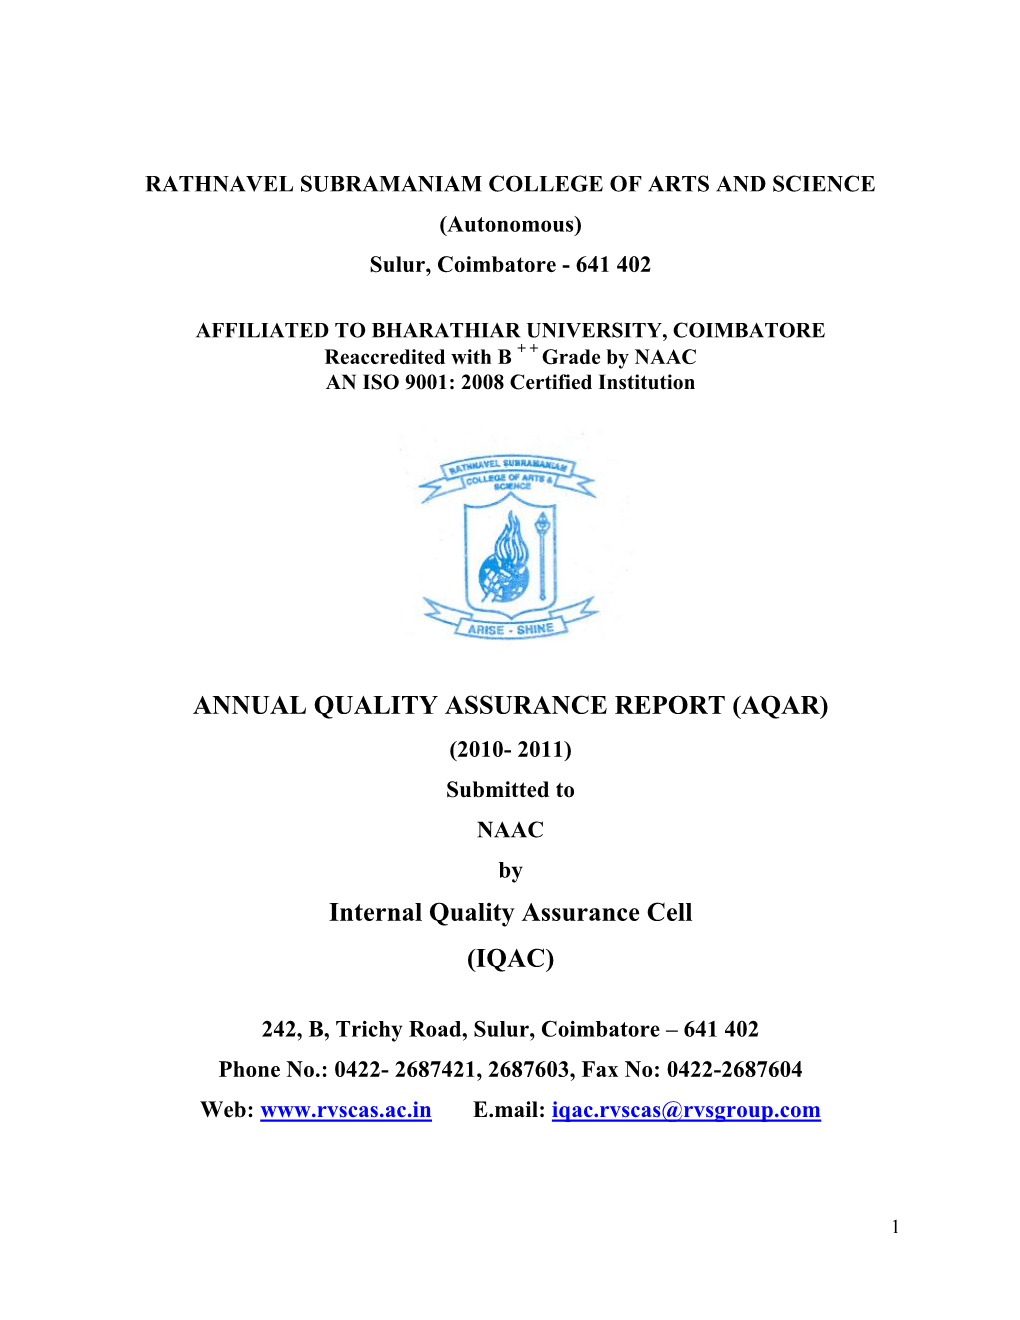 ANNUAL QUALITY ASSURANCE REPORT (AQAR) (2010- 2011) Submitted to NAAC by Internal Quality Assurance Cell (IQAC)